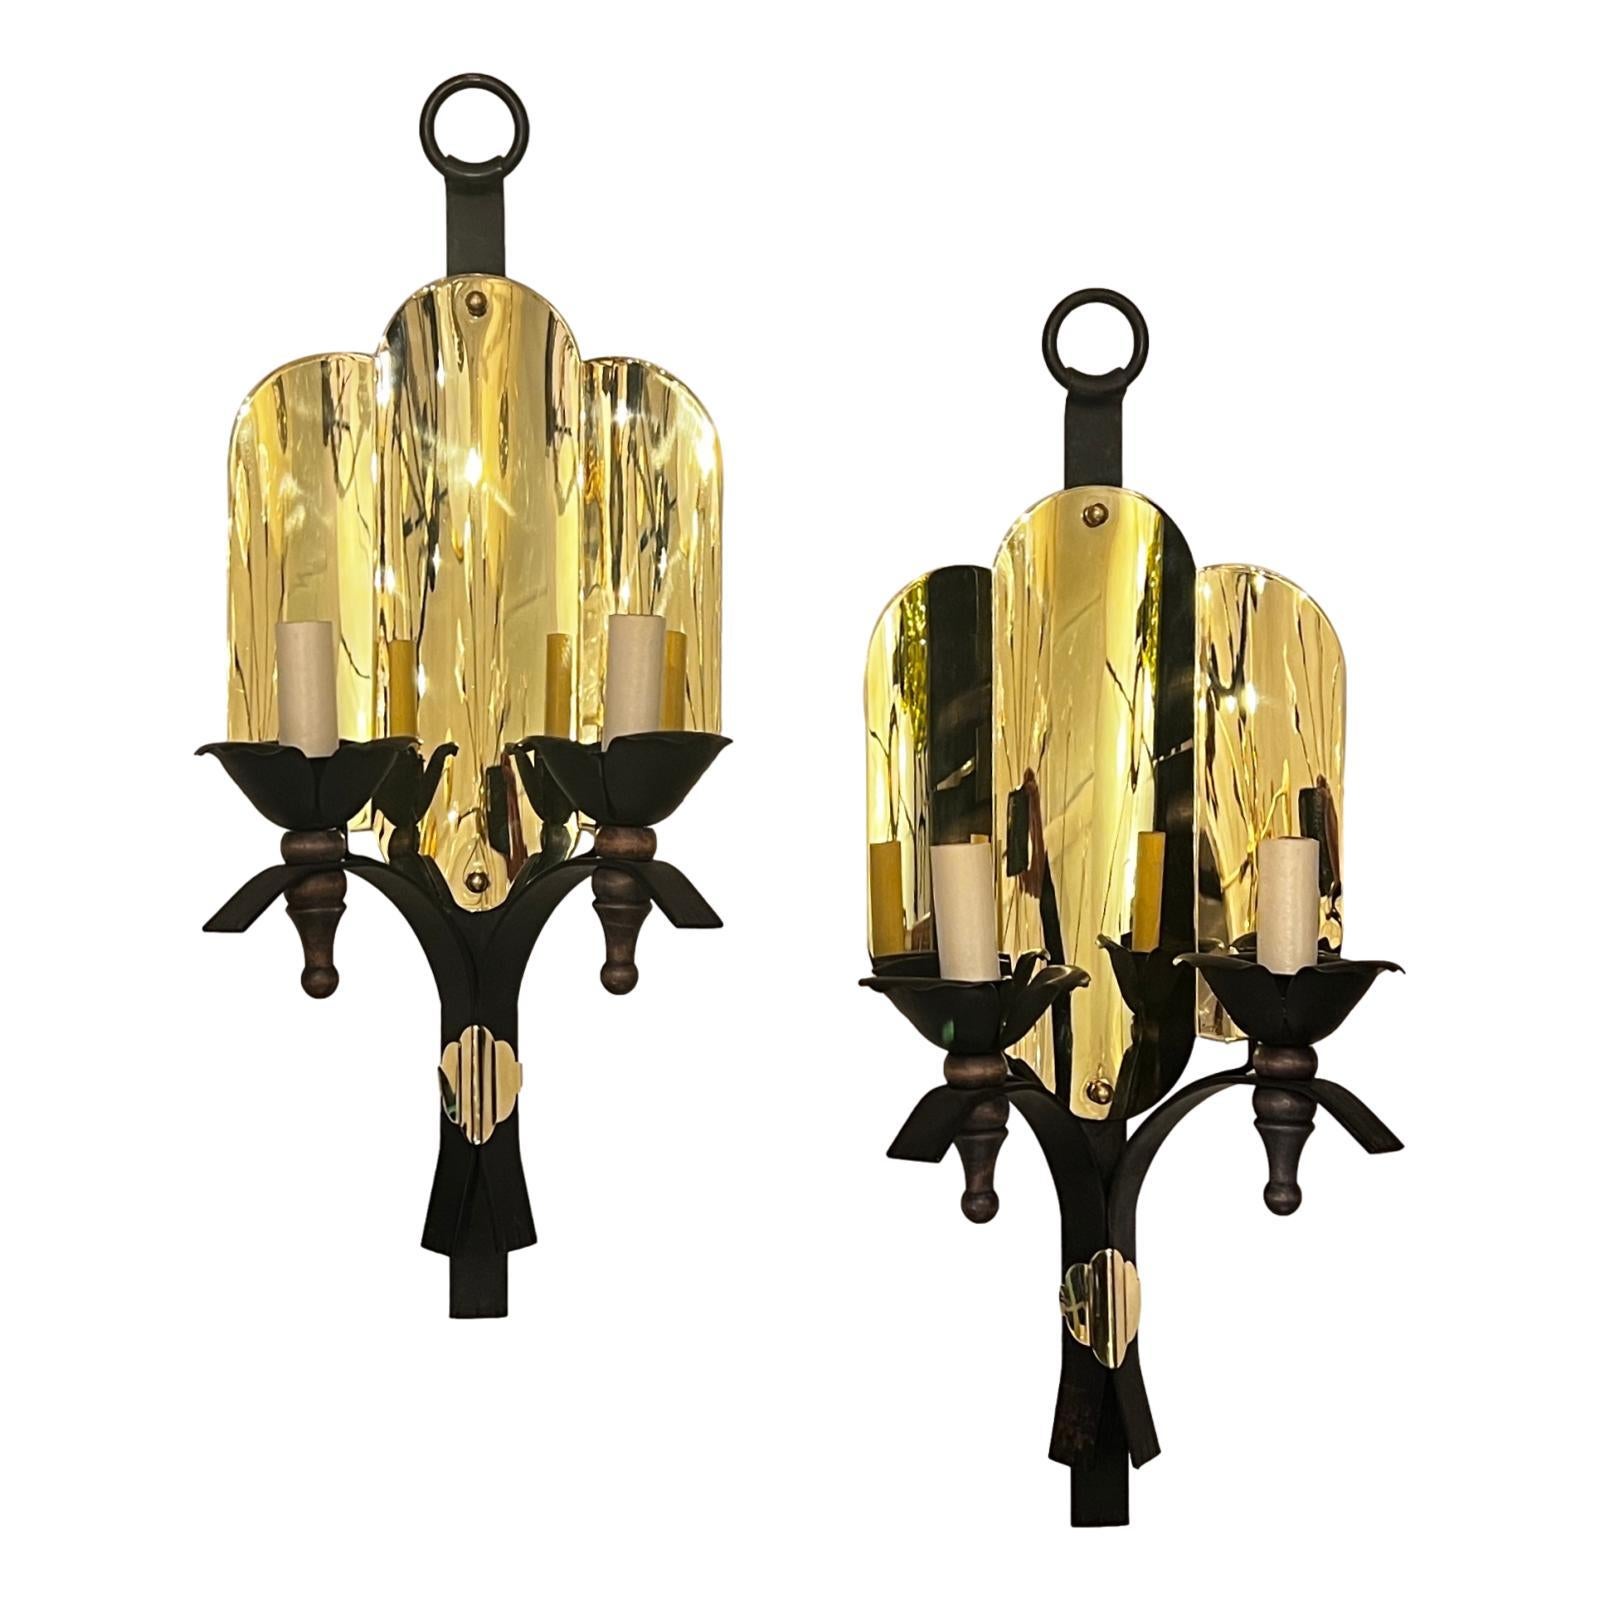 A pair of circa 1940's Italian polished bronze and iron two-light sconces with original patina.

Measurements:
Height: 20.5